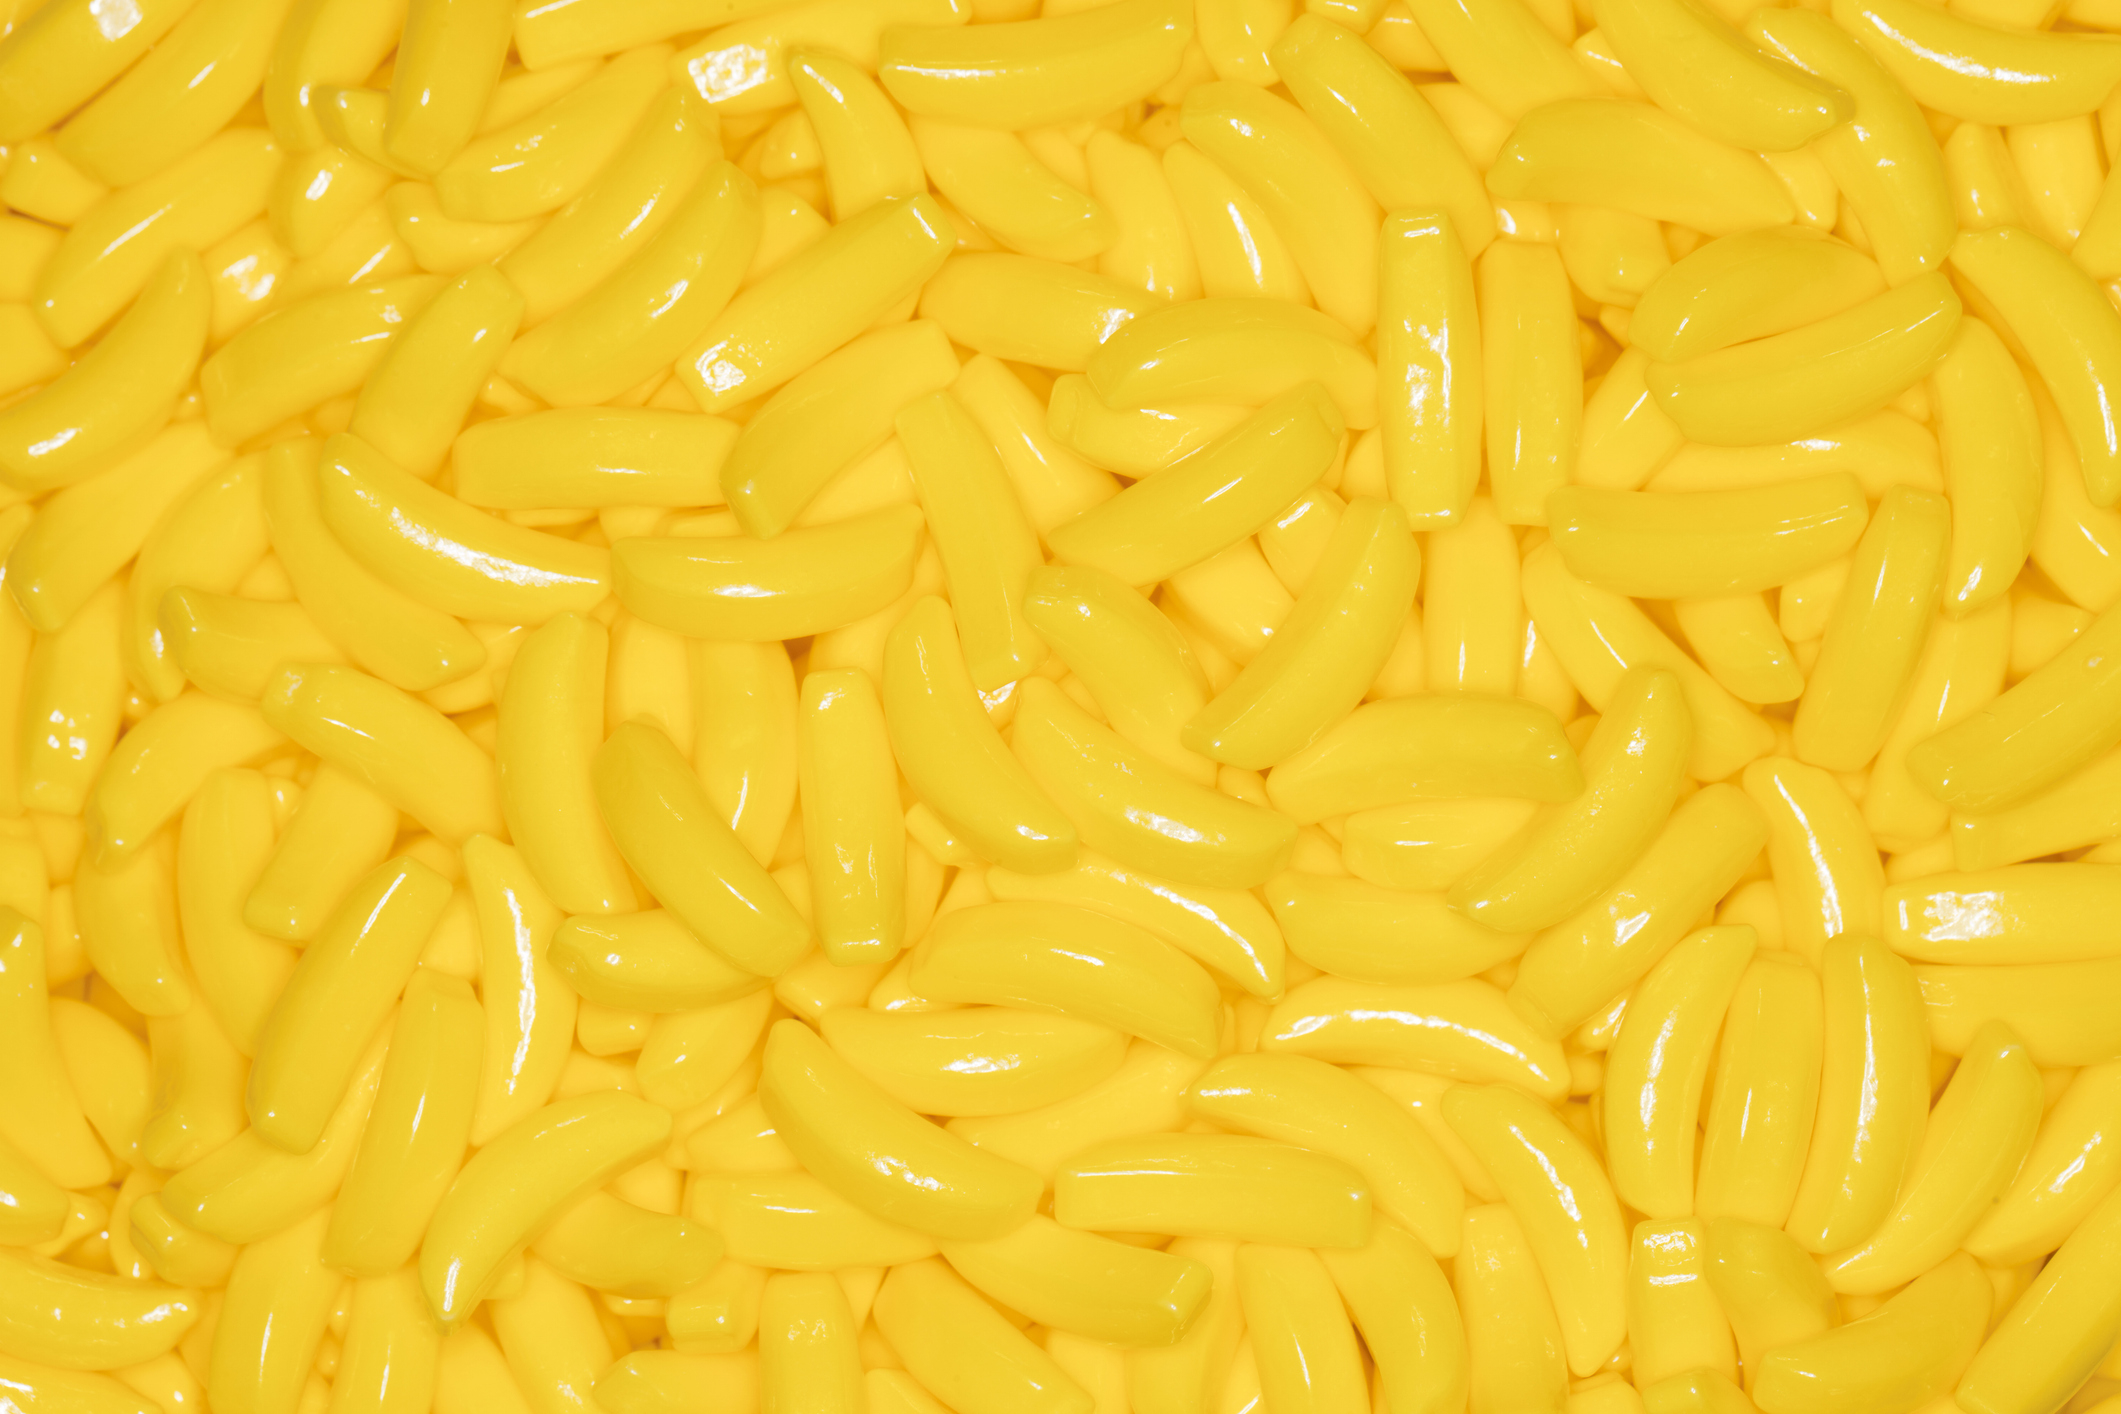 Close-up of canned macaroni pasta without any distinguishing features or packaging